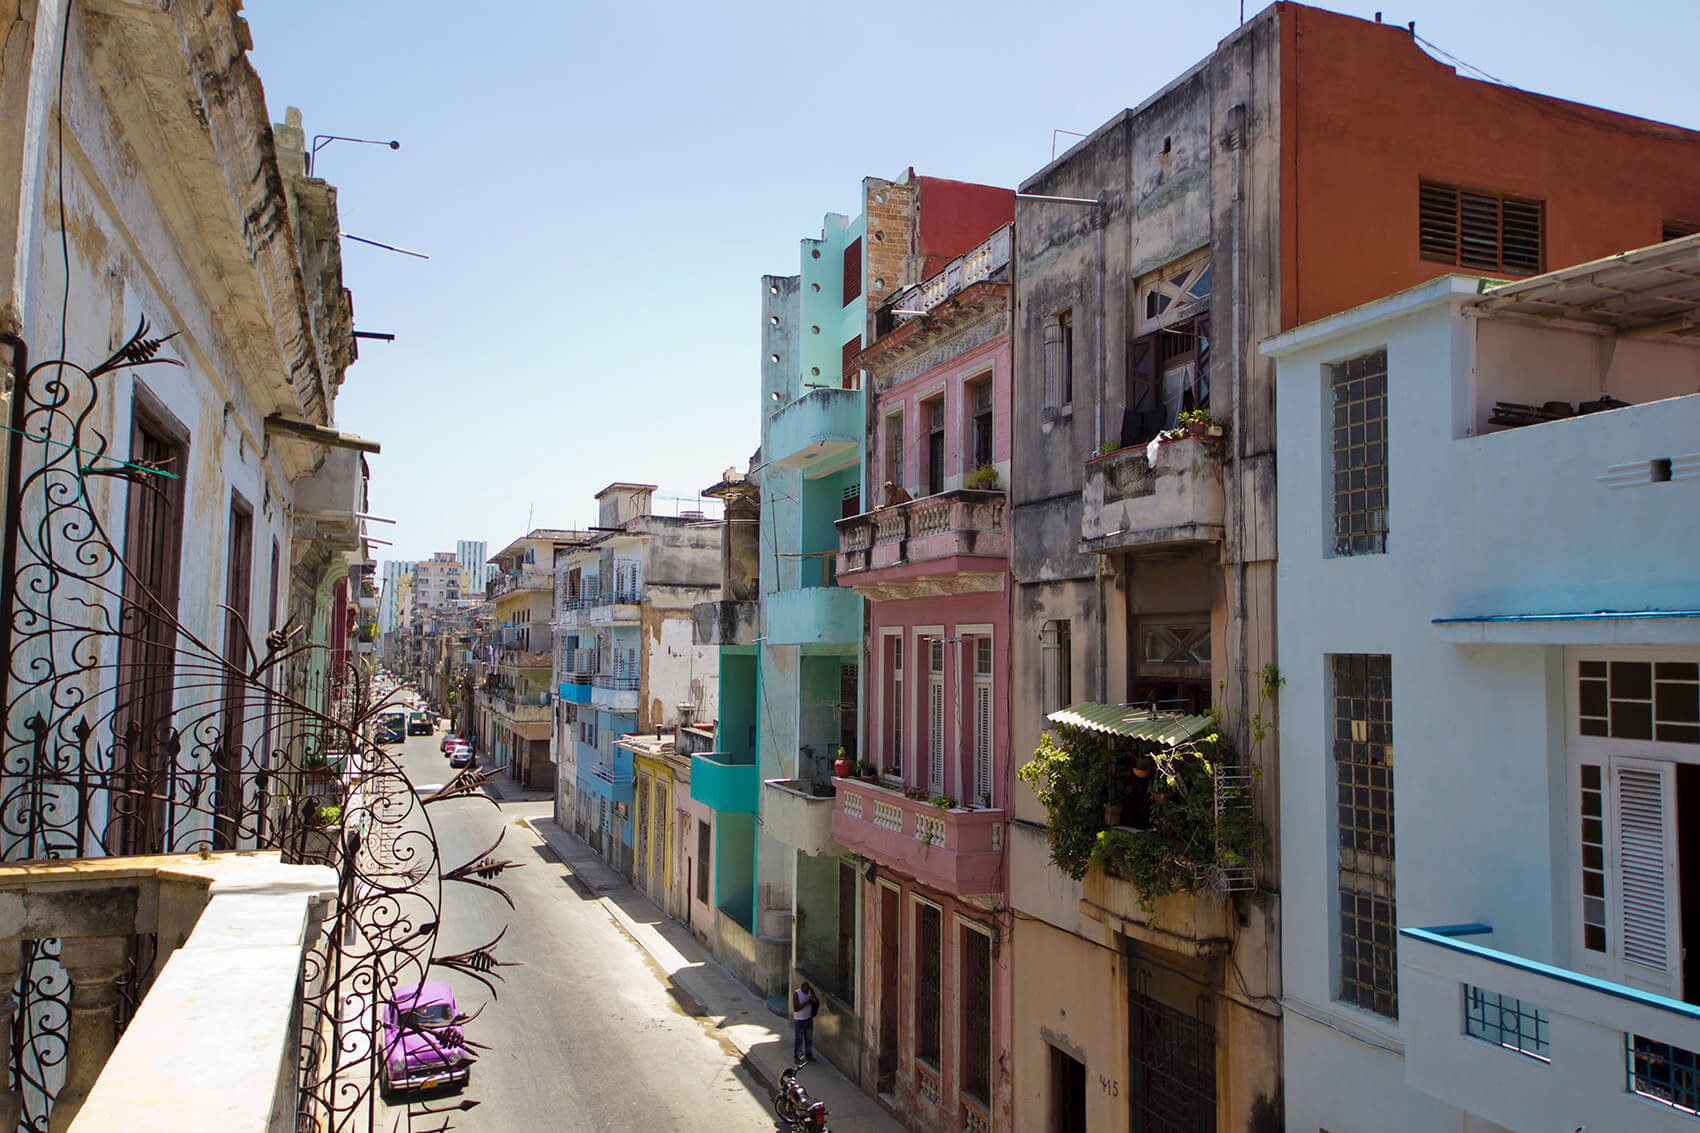 Road with colourful buildings in Habana Centro